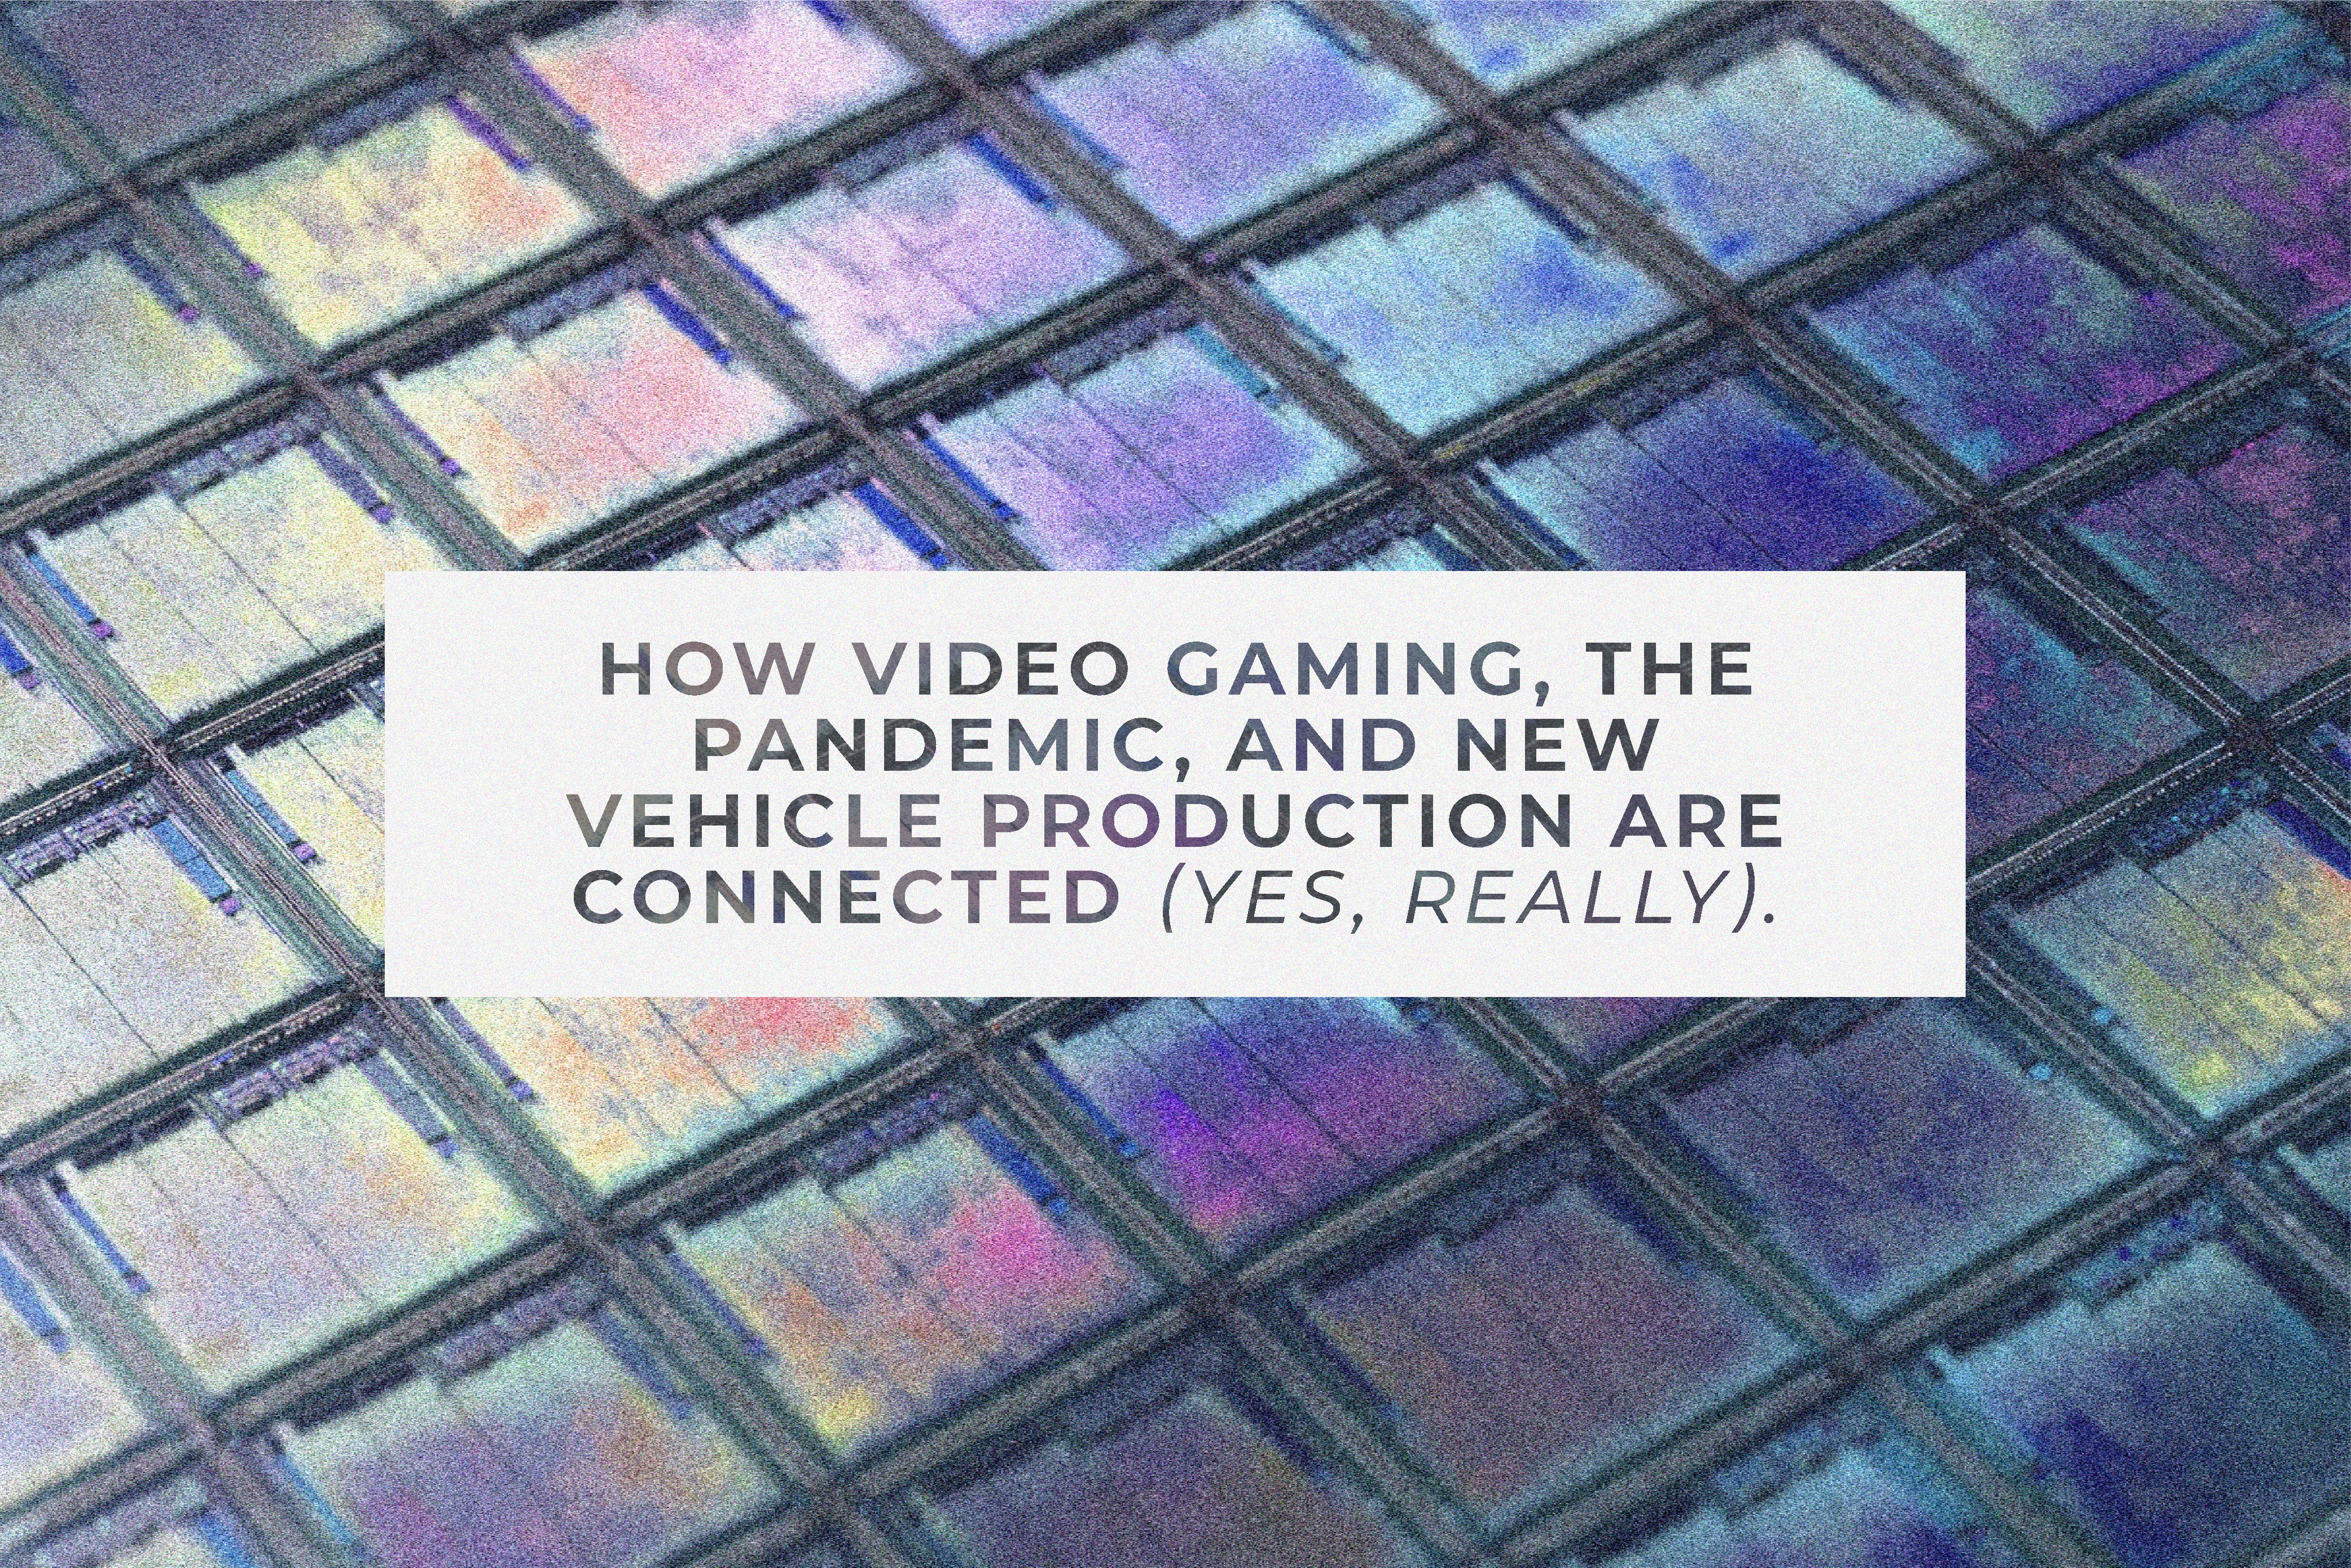 How Video Gaming, the Pandemic, and New Vehicle Production Are Connected (yes, really).